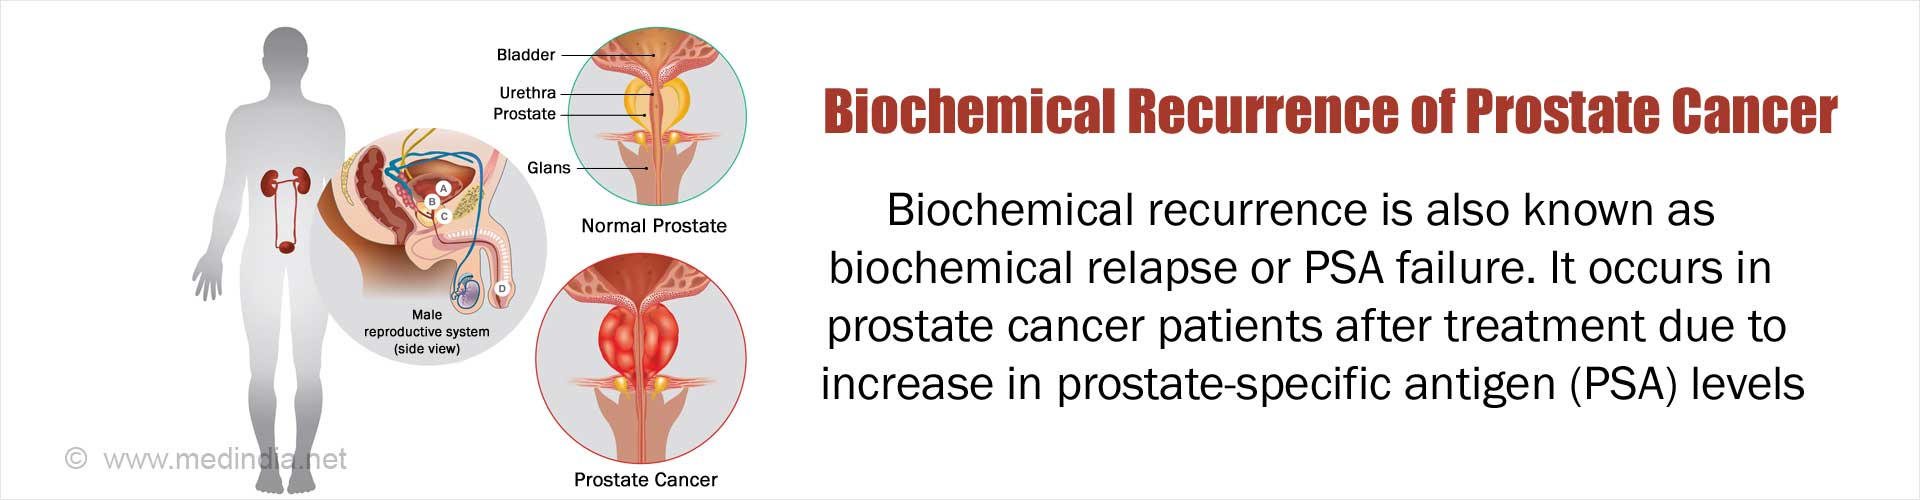 Biochemical Recurrence Of Prostate Cancer